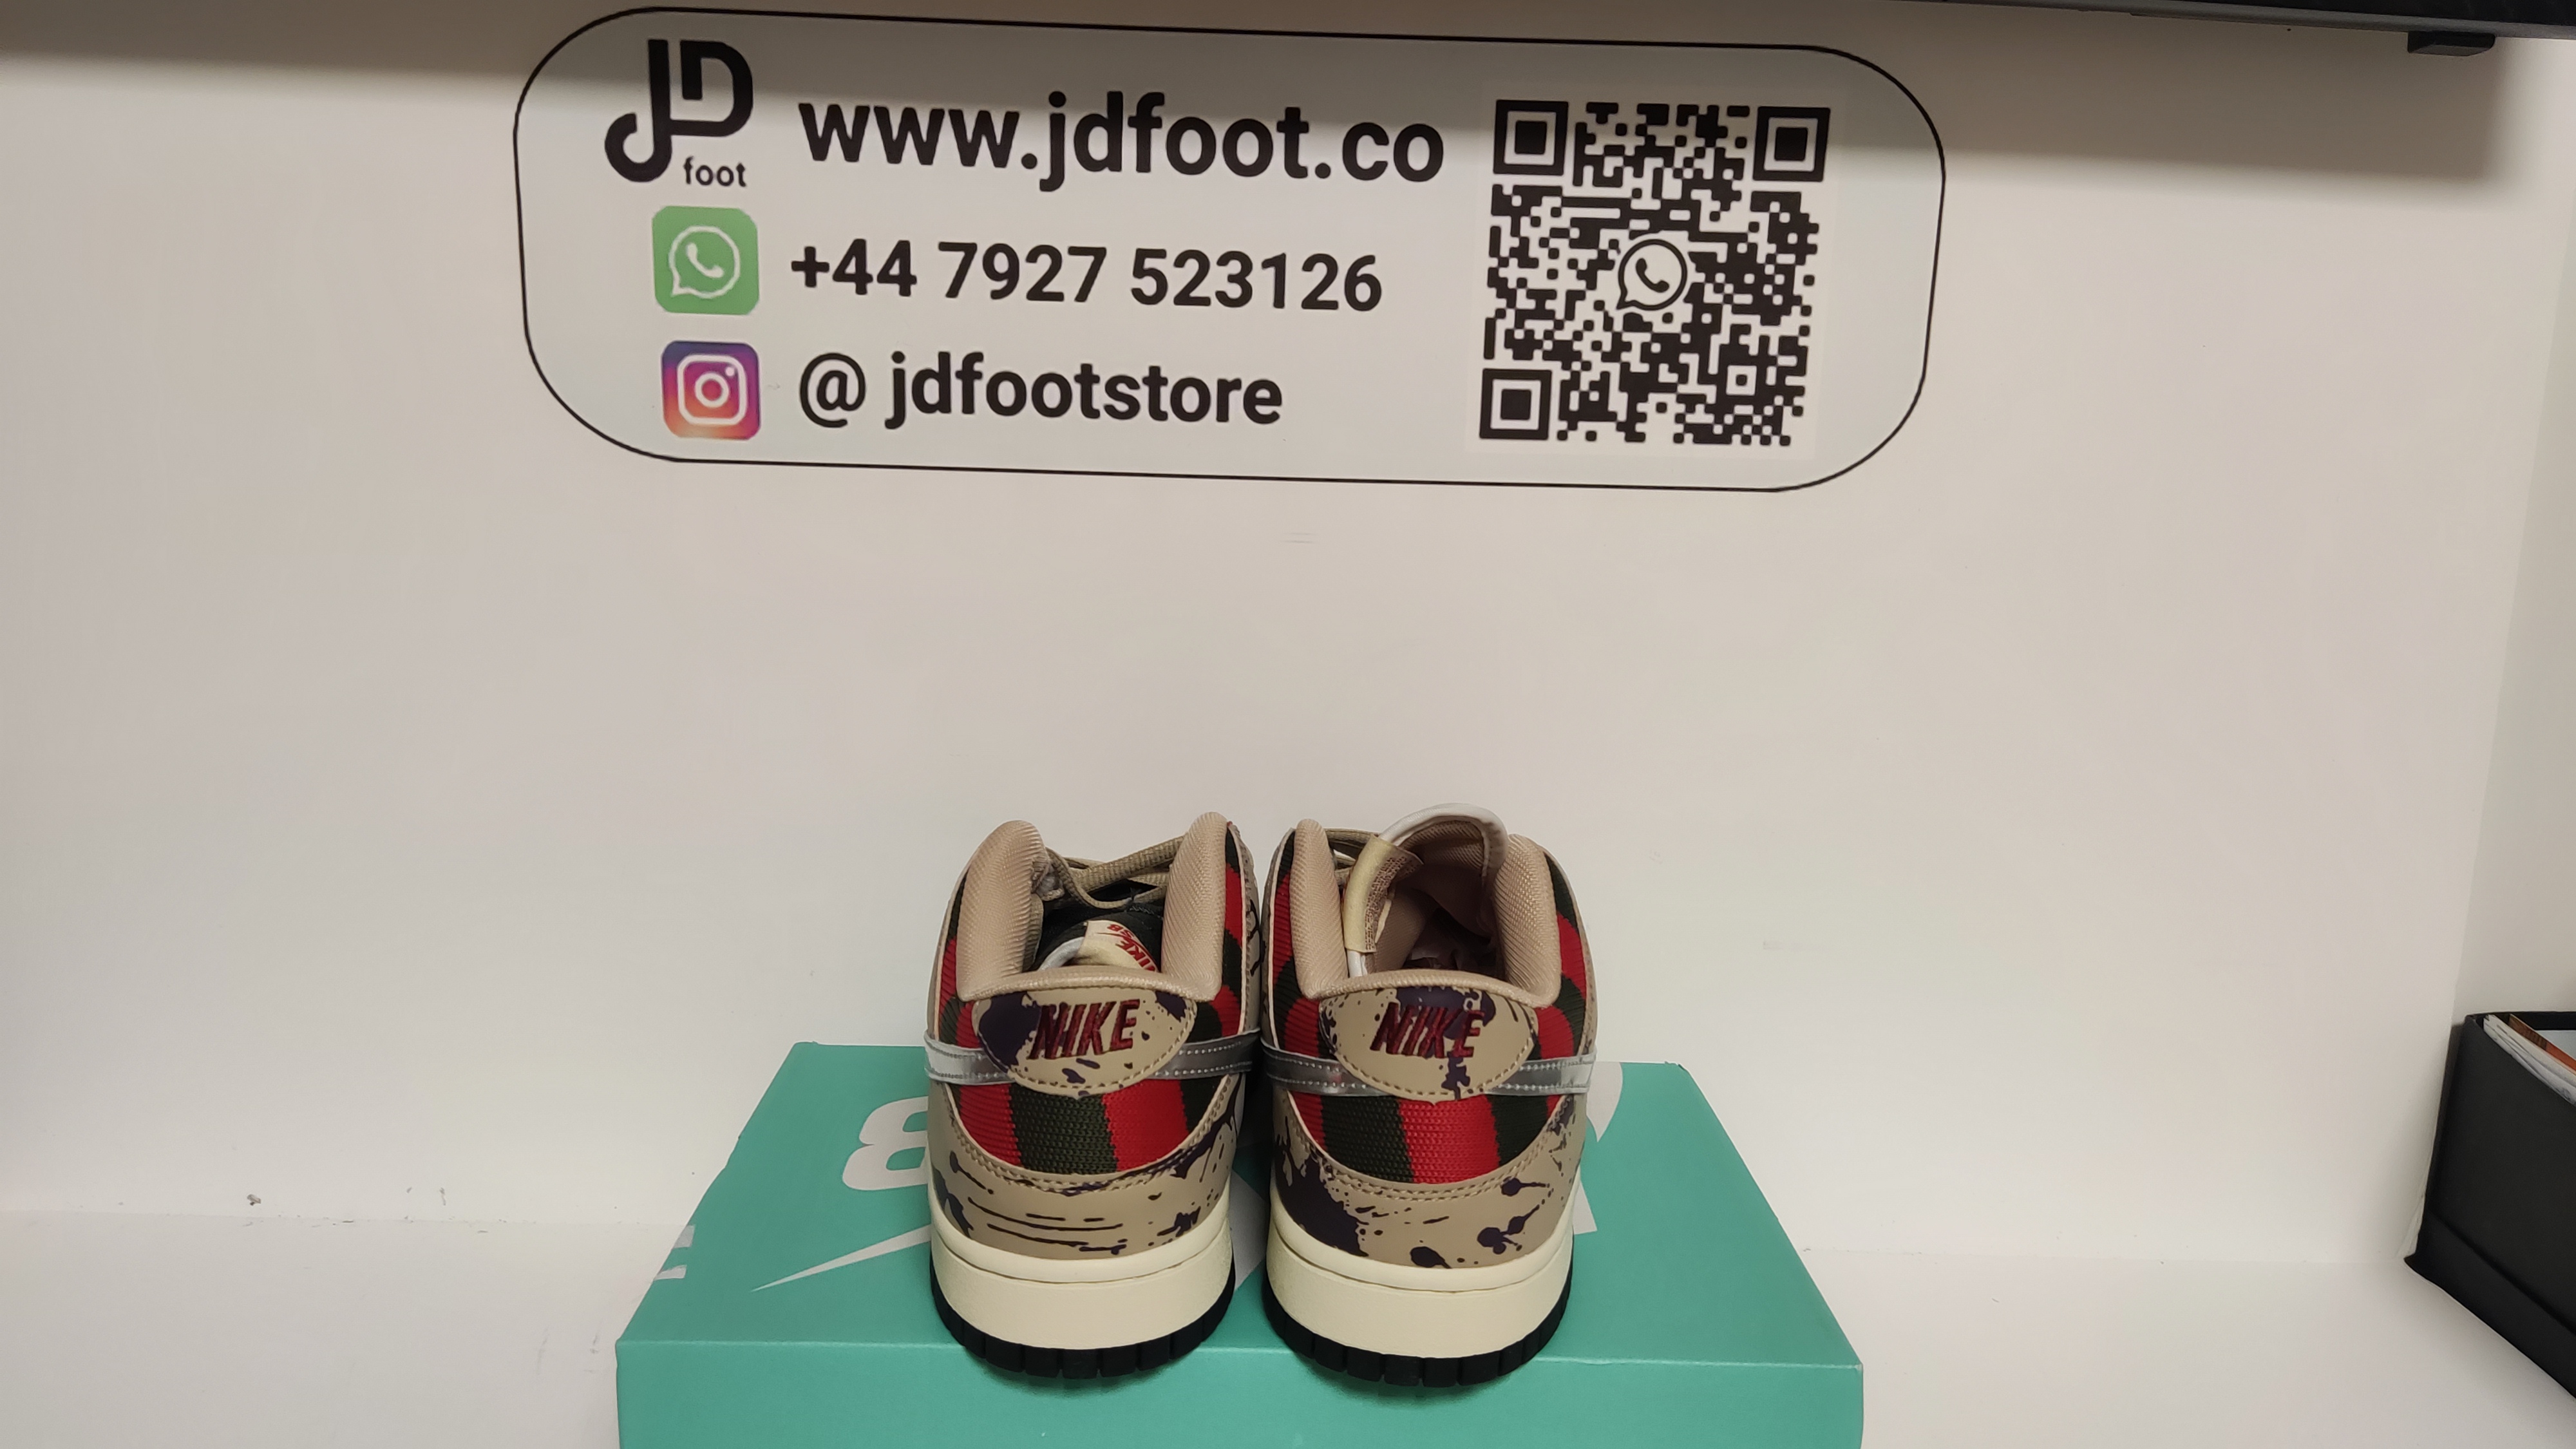 QC Picture Replica Nike Dunks Pro SB Freddy Krueger From Jdfoot